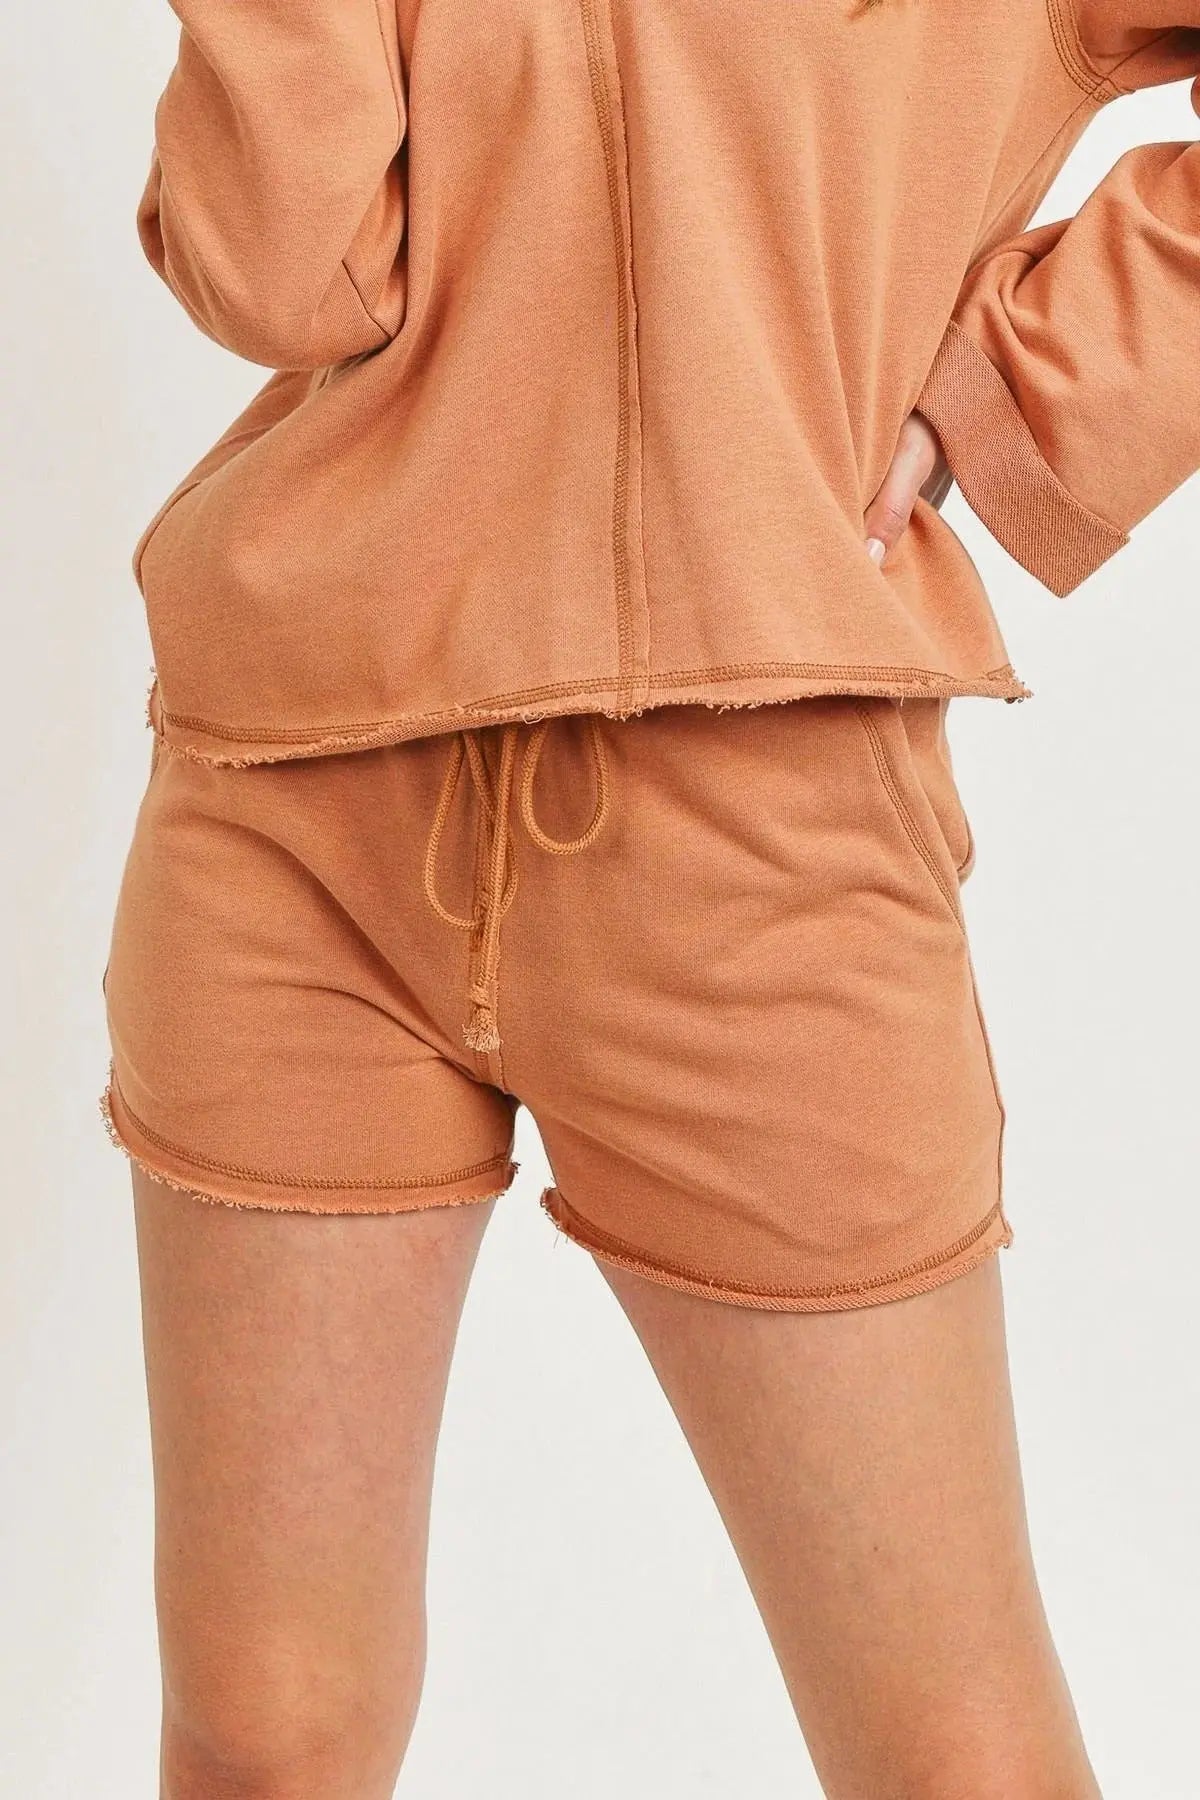 Solid French Terry Waist String With Raw Bottom Hem Shorts Sunny EvE Fashion